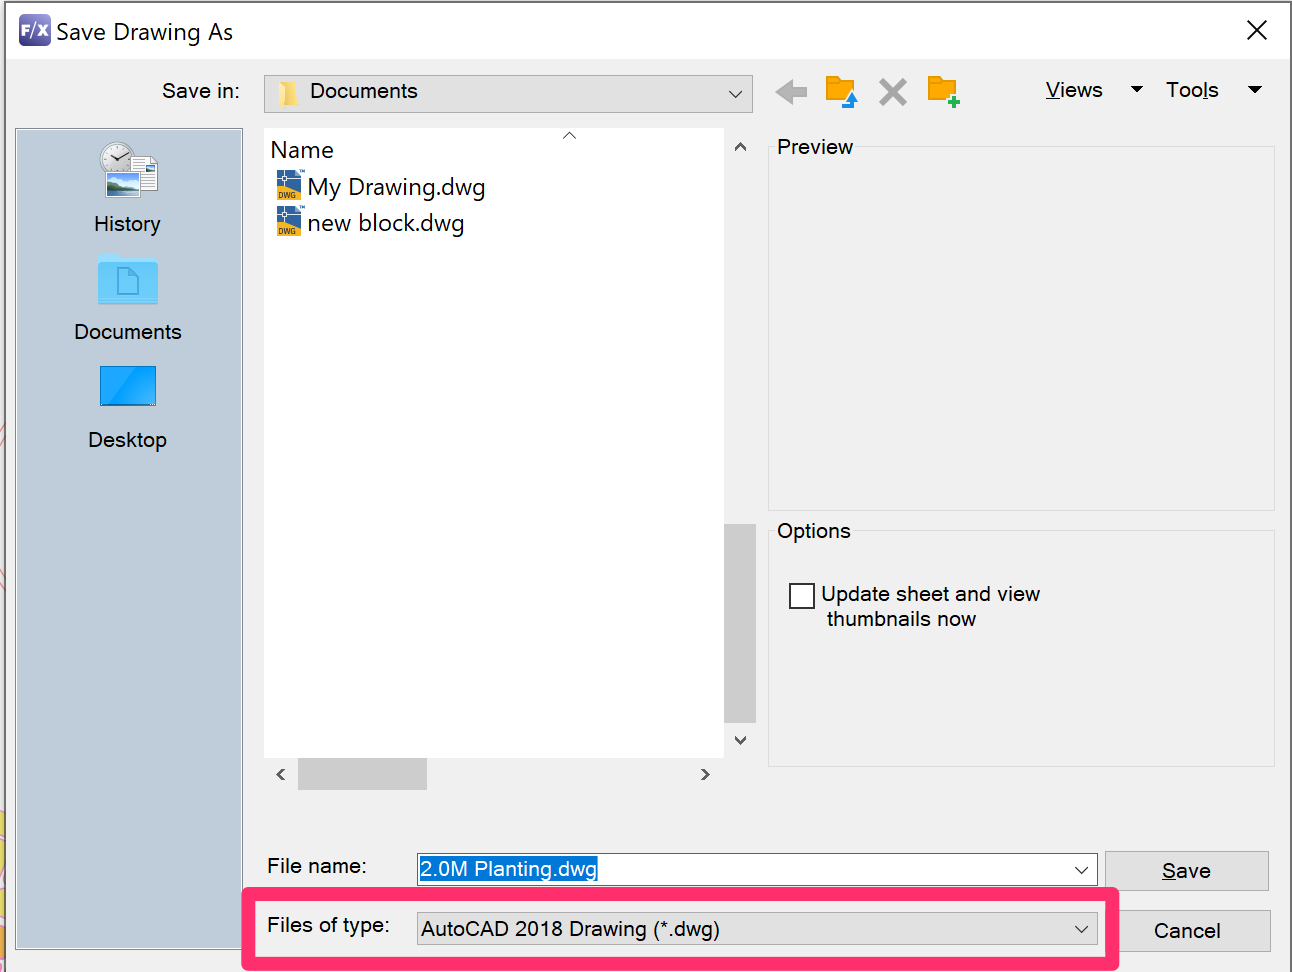 Save Drawing As dialog box showing DWG file version in the Files of type menu